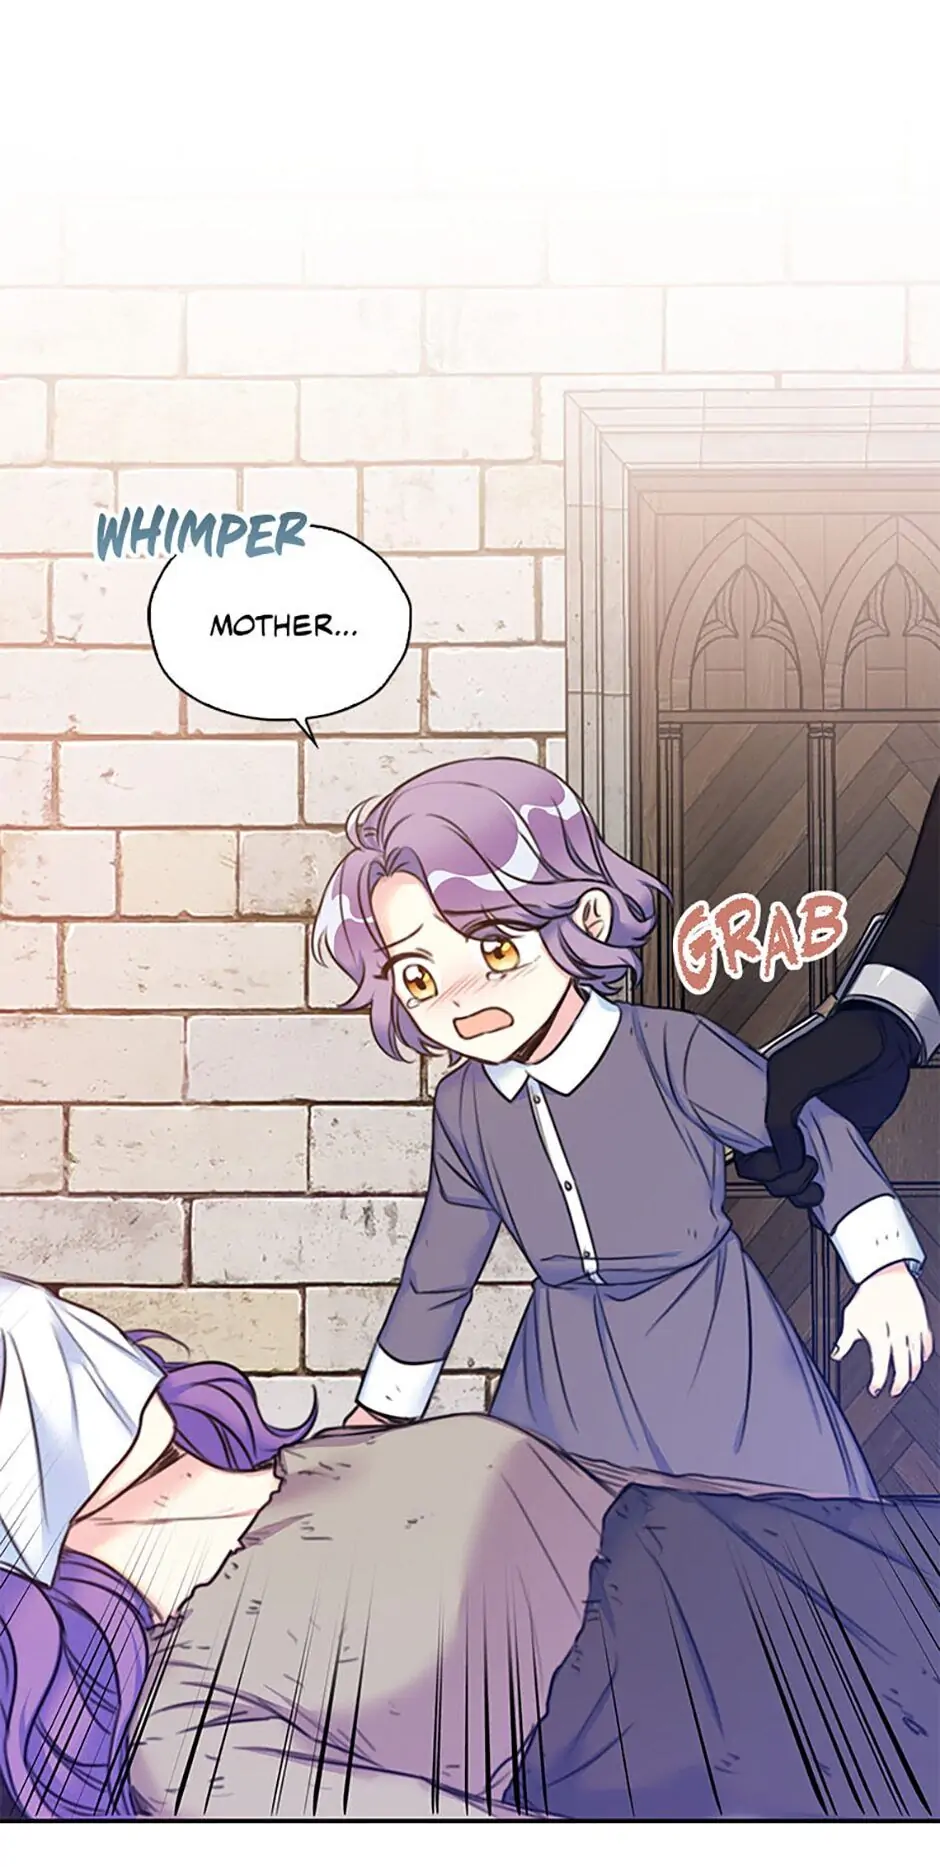 Wicked No More Chapter 2 Born as the Daughter of the Wicked Woman - Episode 2 - Coffee Manga